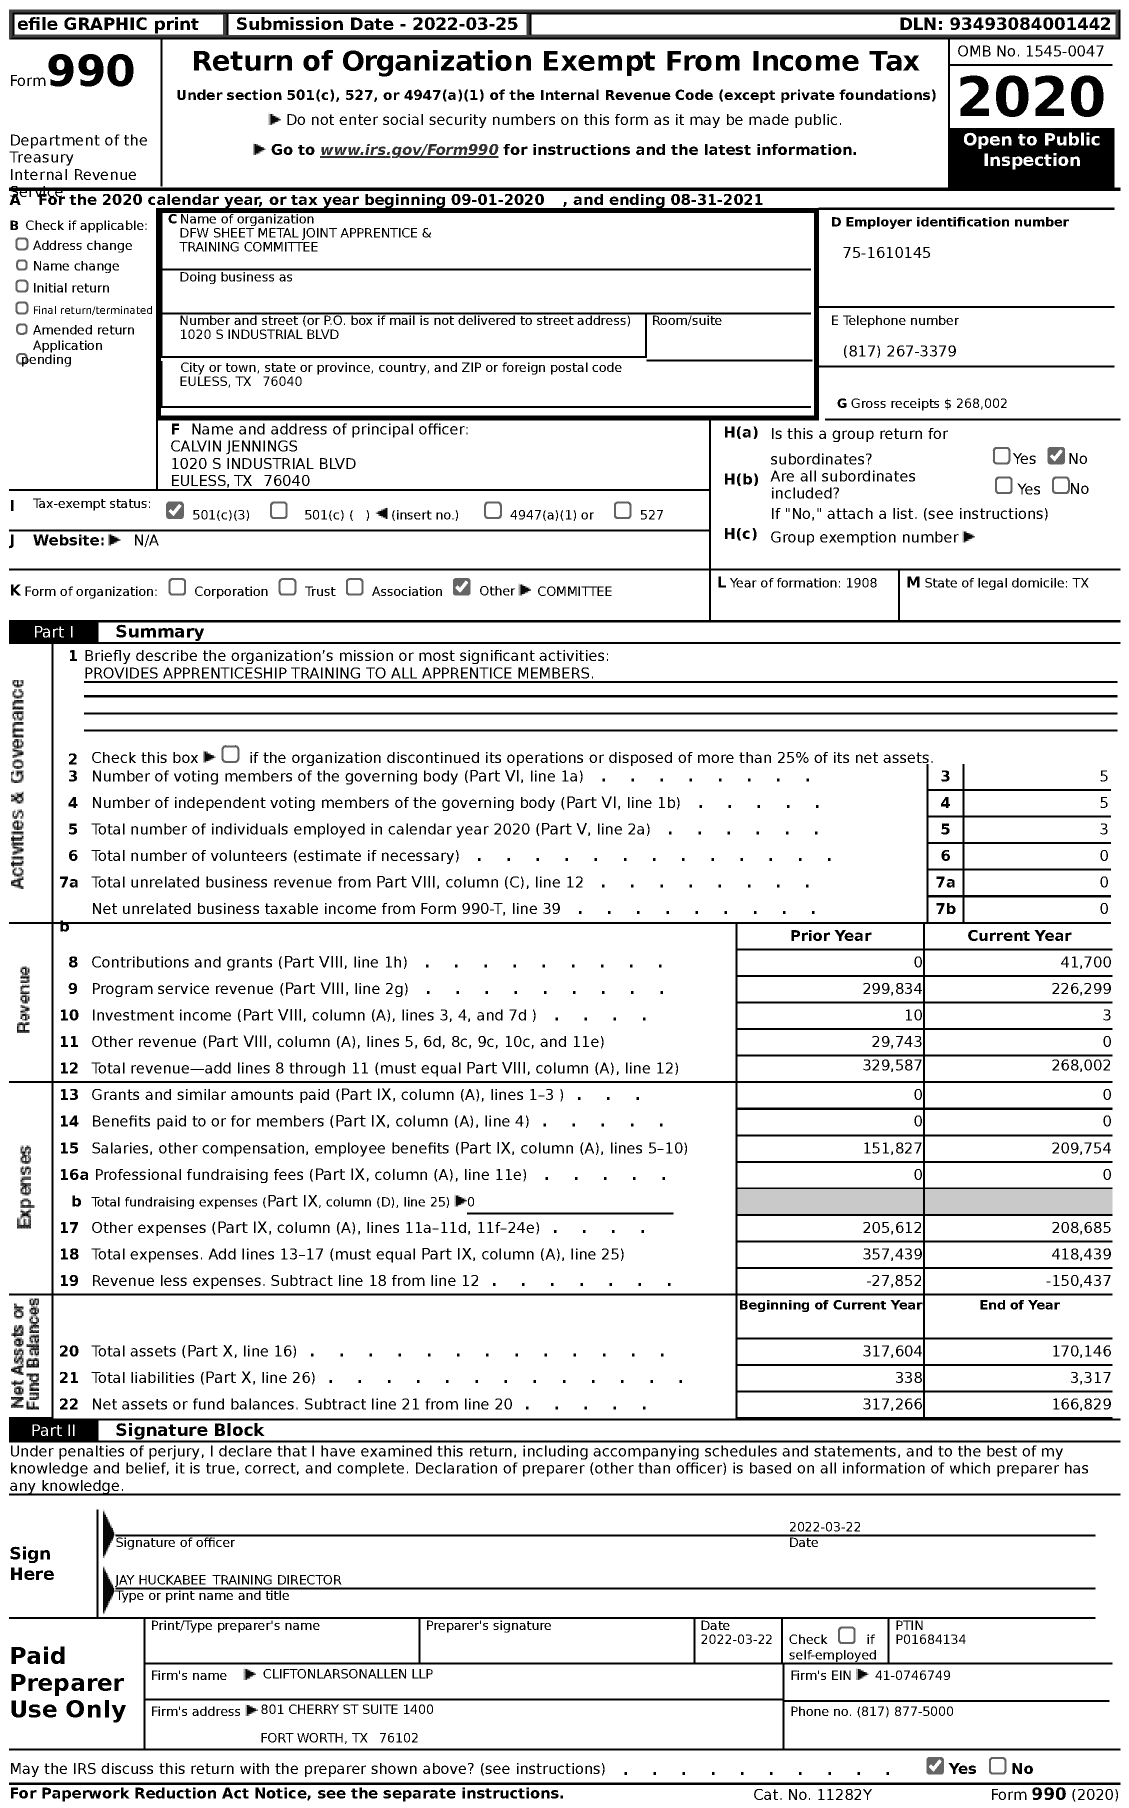 Image of first page of 2020 Form 990 for DFW Sheet Metal Joint Apprentice and Training Committee